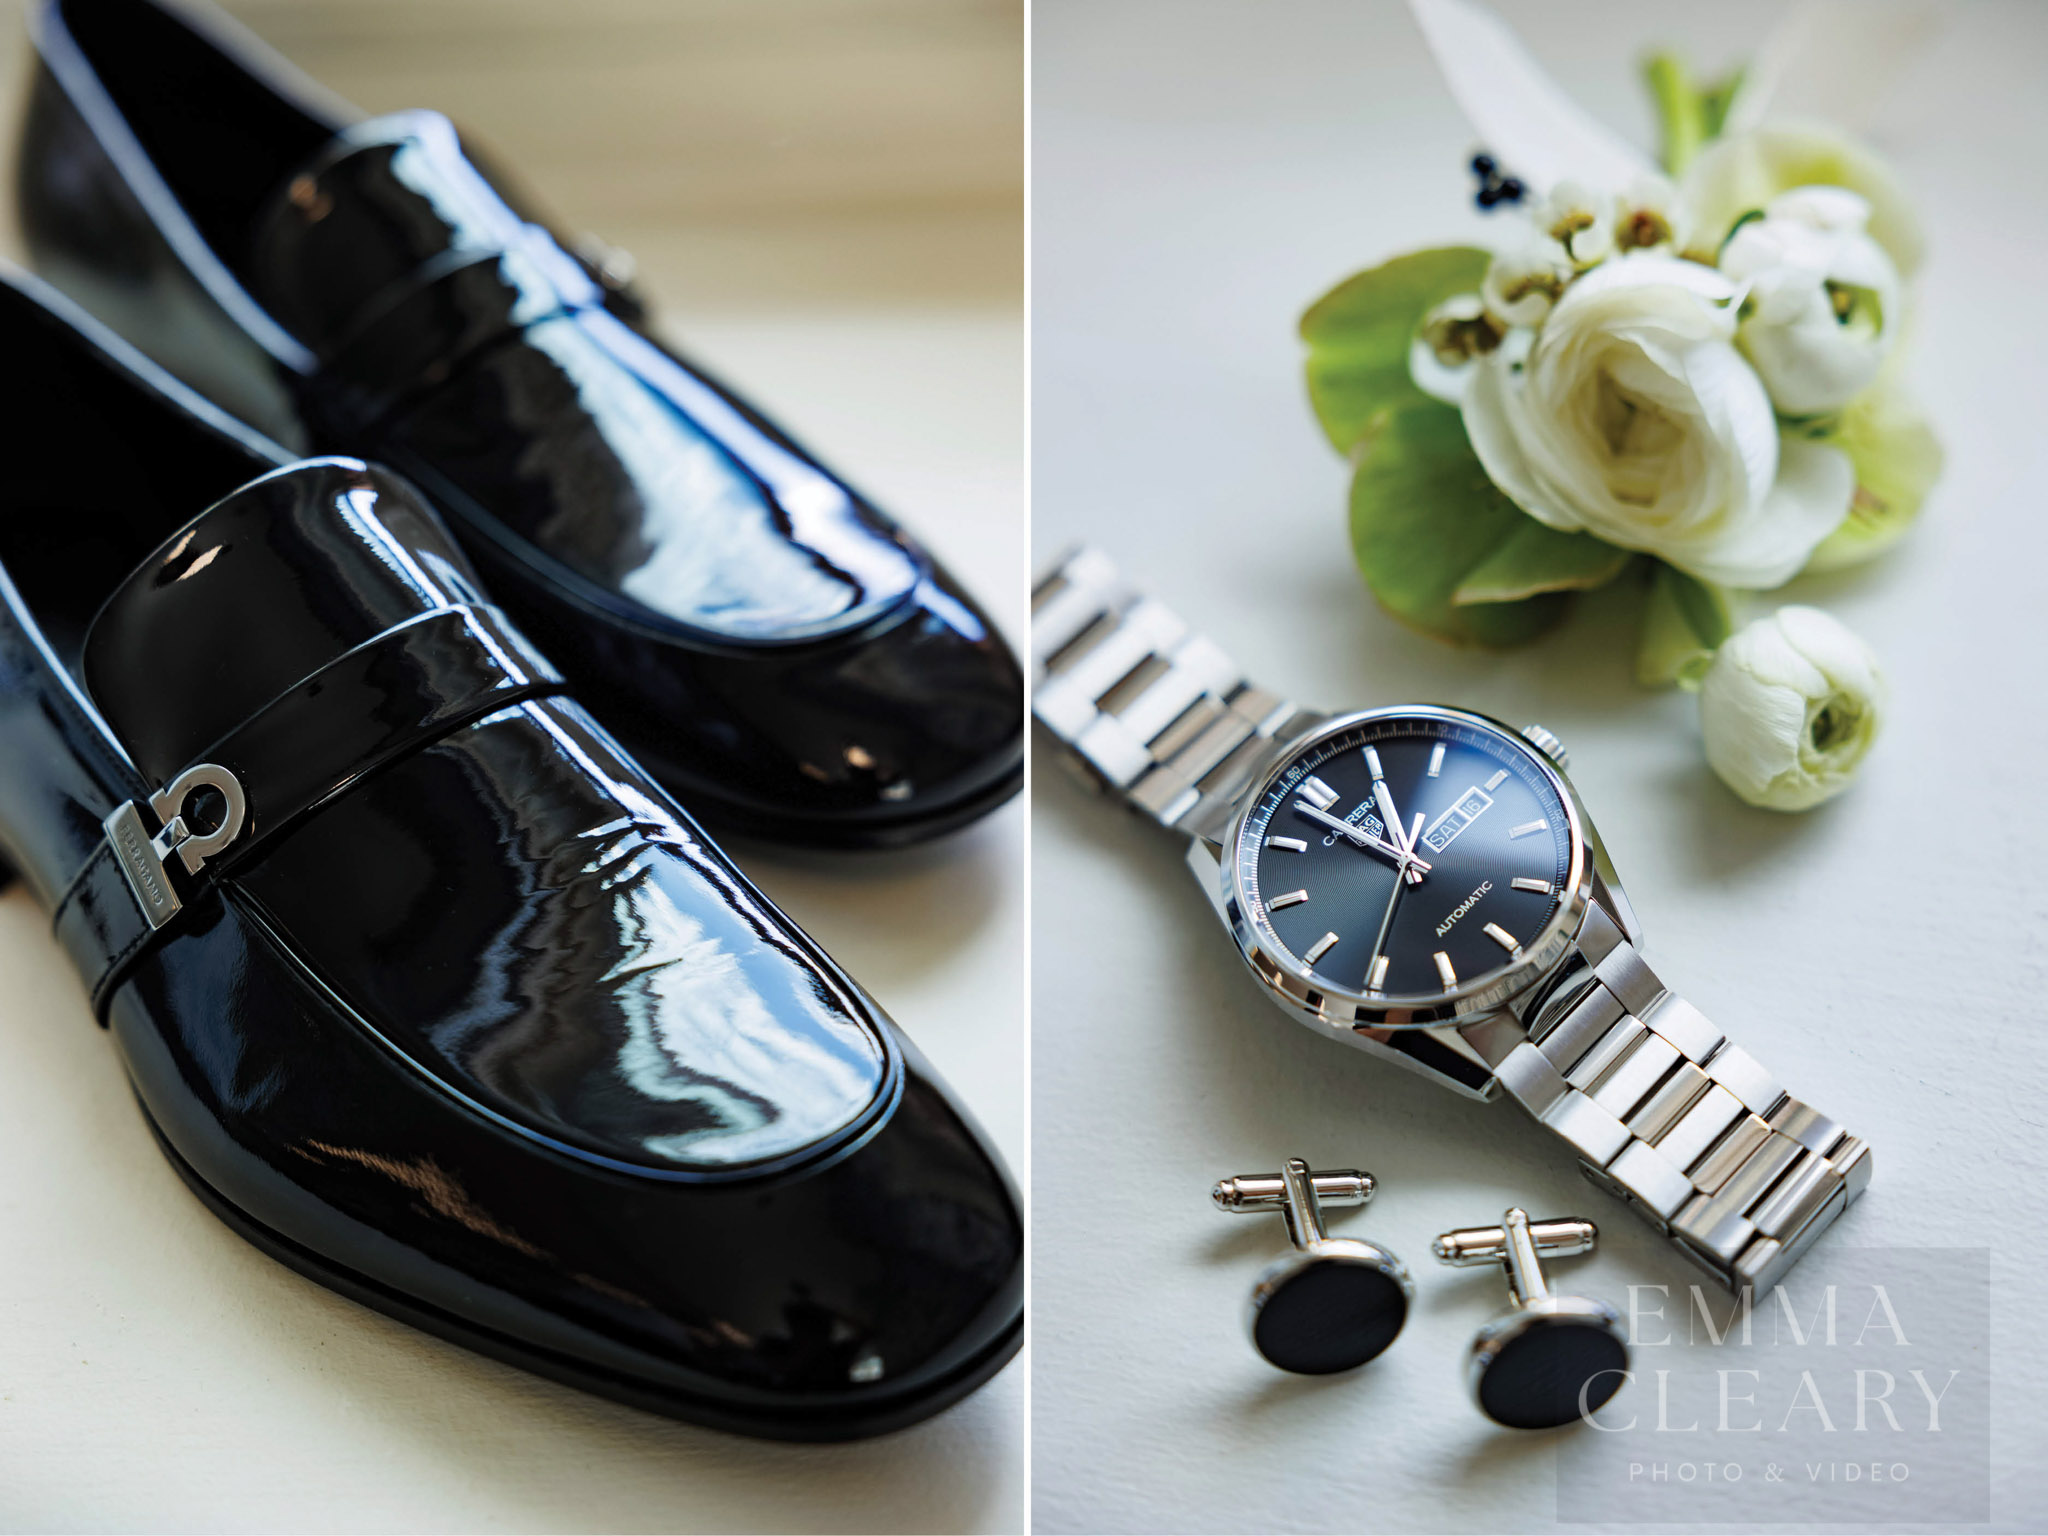 Groom's shoes, cufflinks, watches, boutonnieres